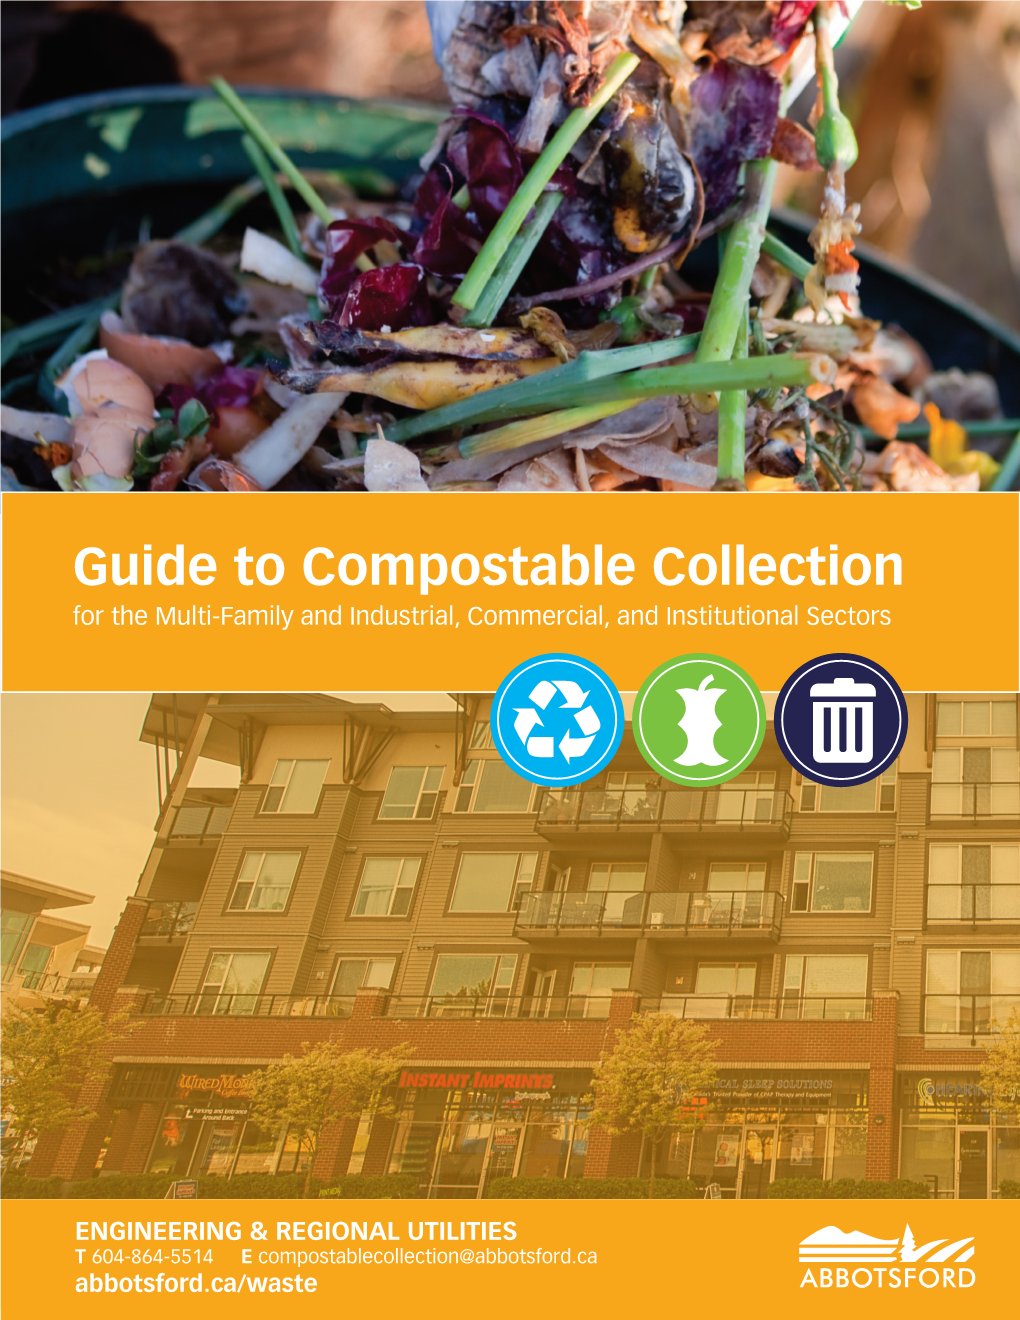 Guide to Compostables Collection for Multi-Family & ICI Properties